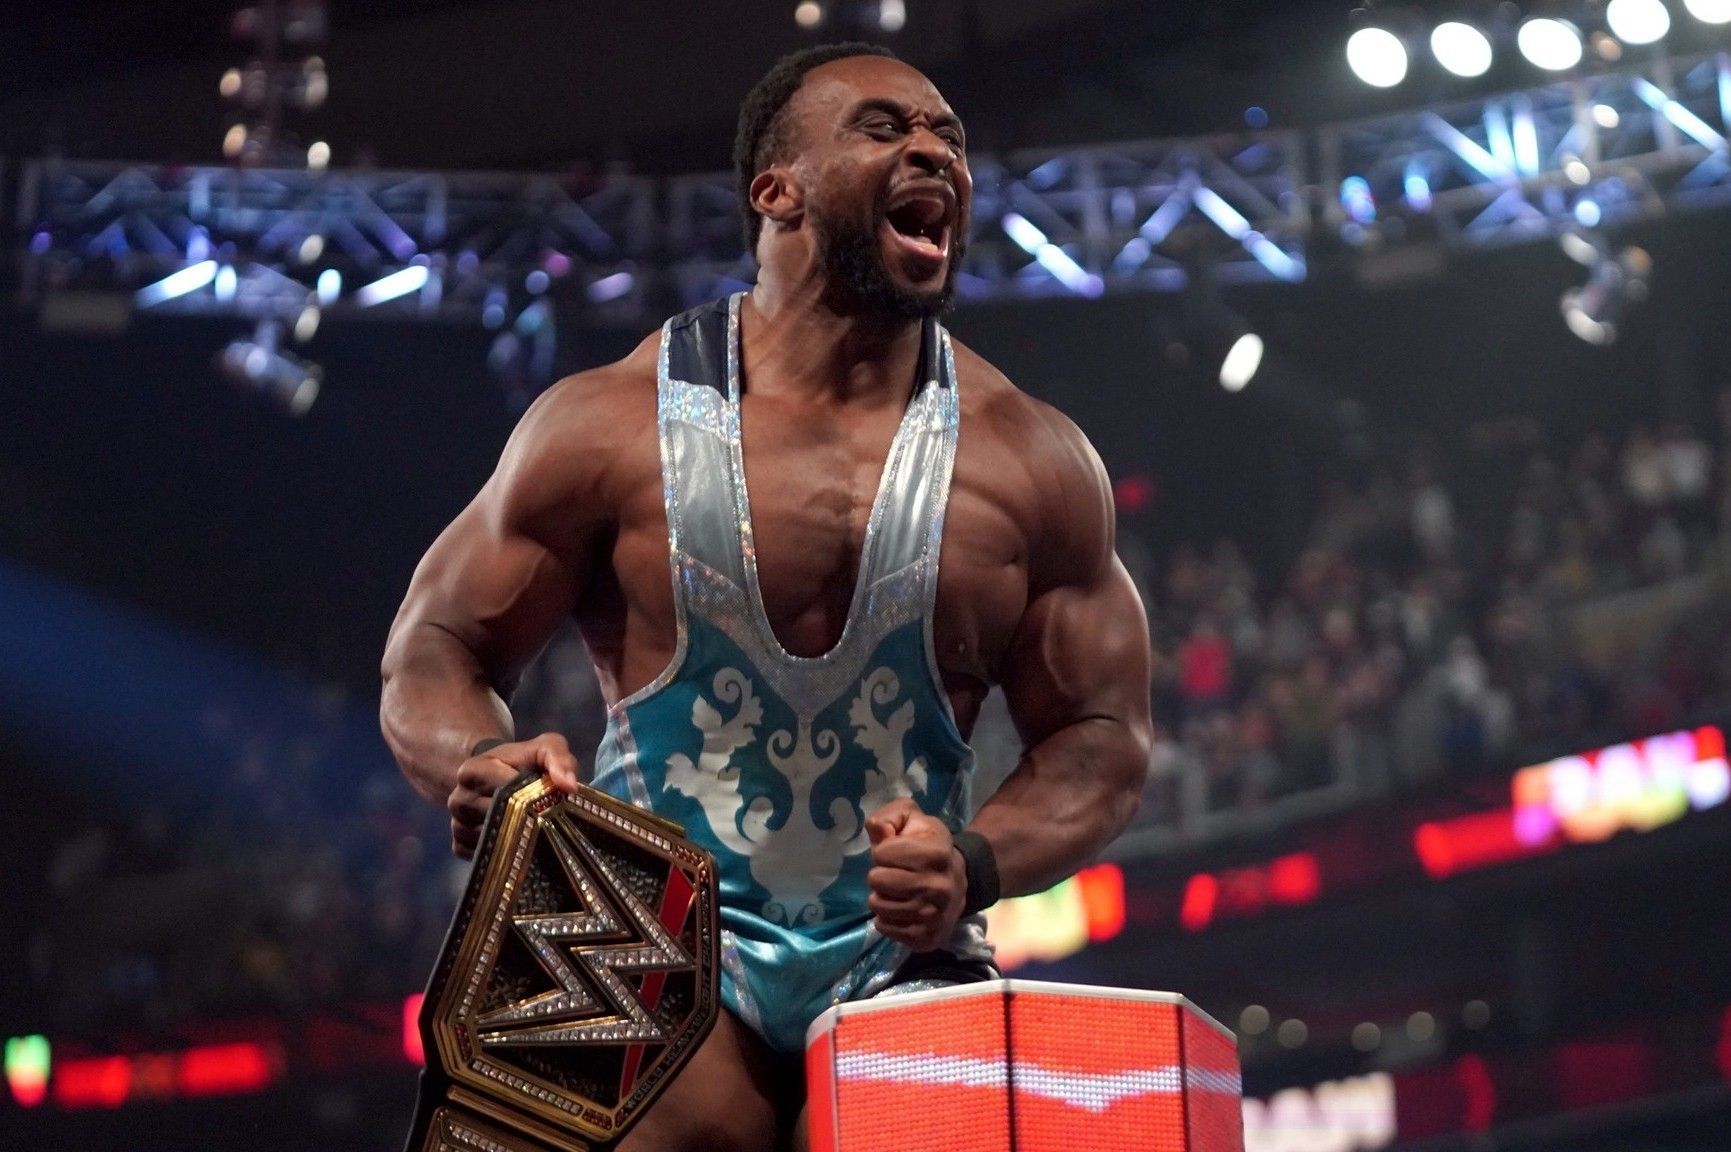 Big E to face winner of the ladder match